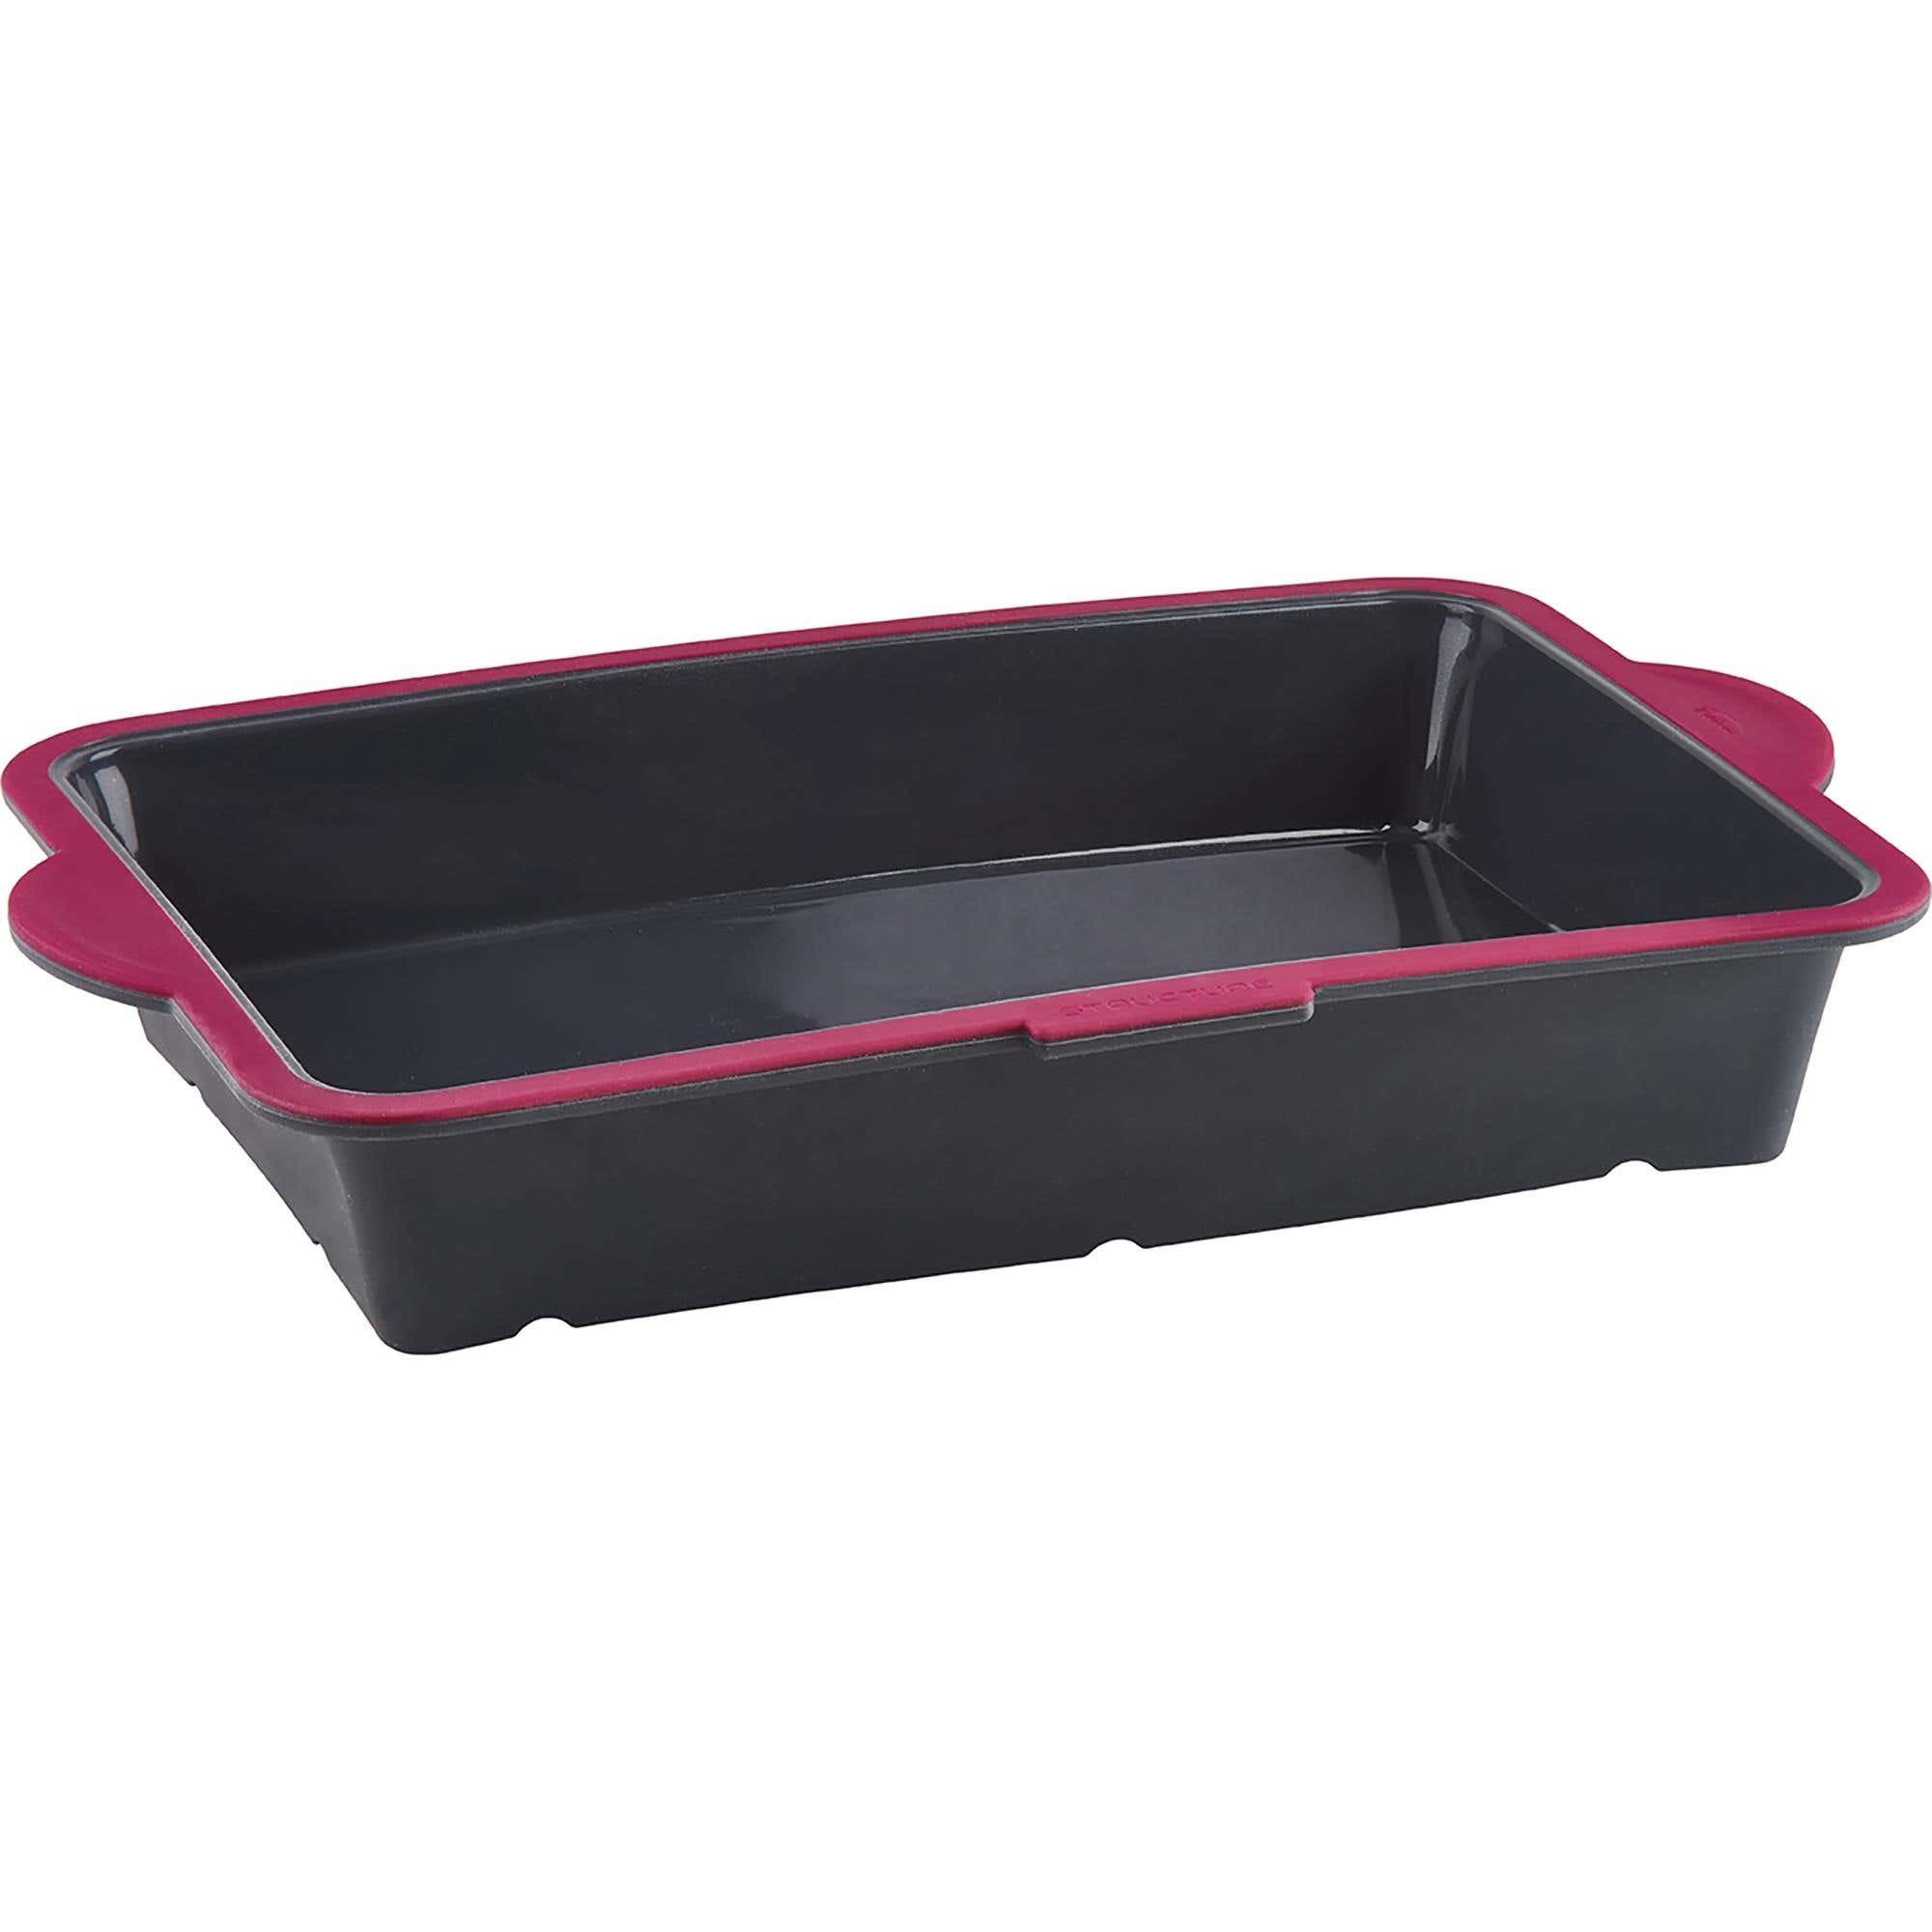 Pro Oblong Cake Pan 9" x 13" - Silicone